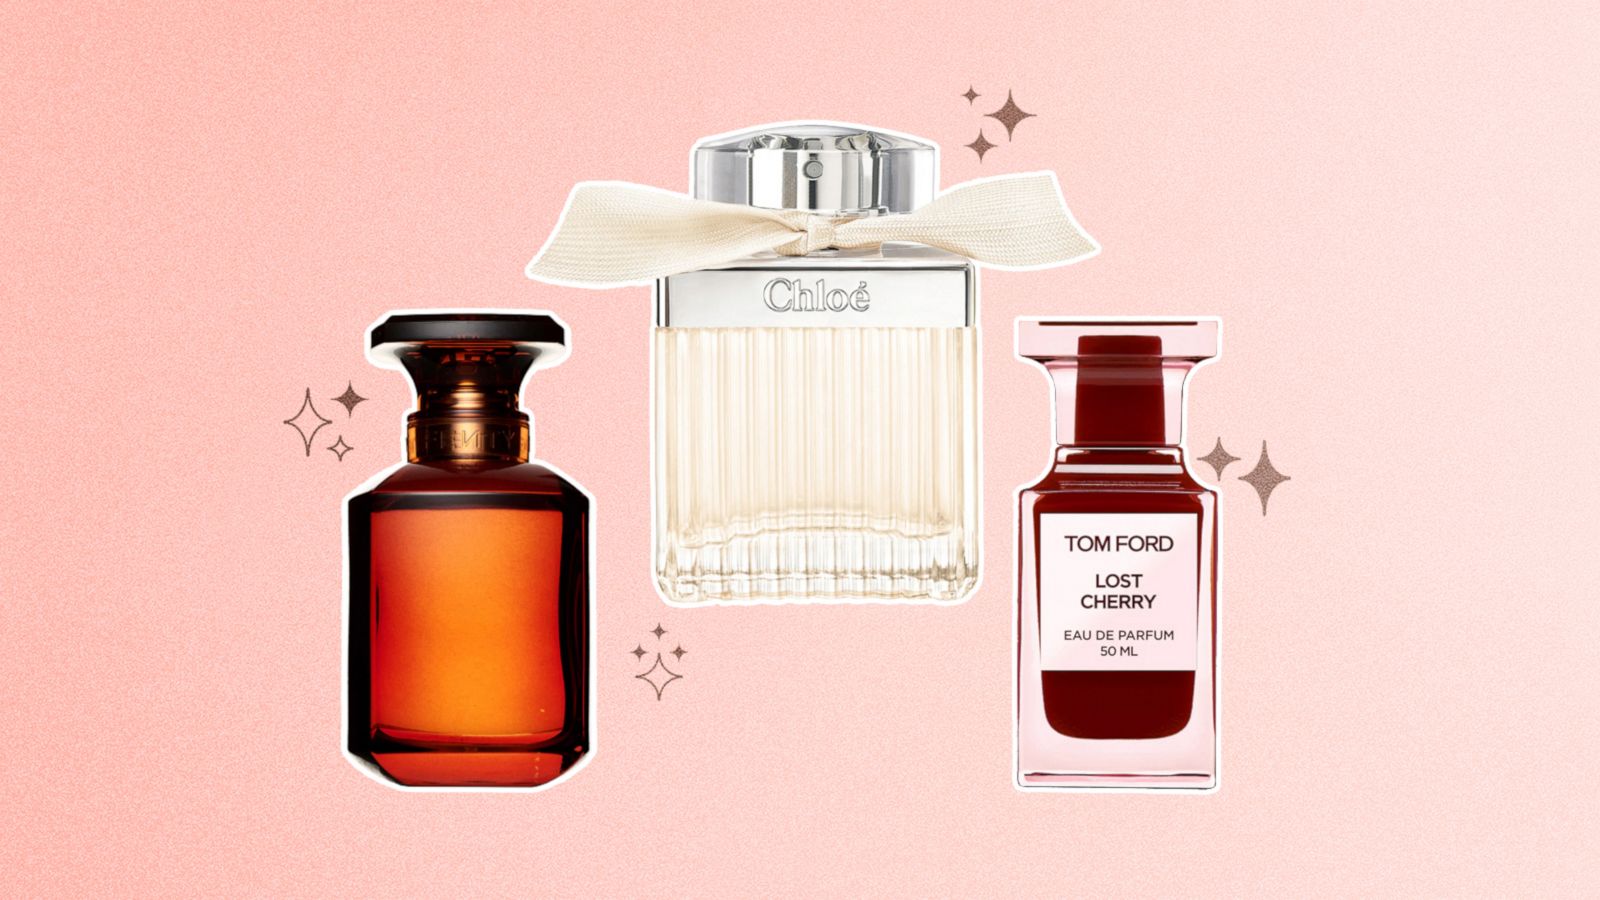 Sephora's Fragrance for All Sale is here! Get 20% off Tom Ford